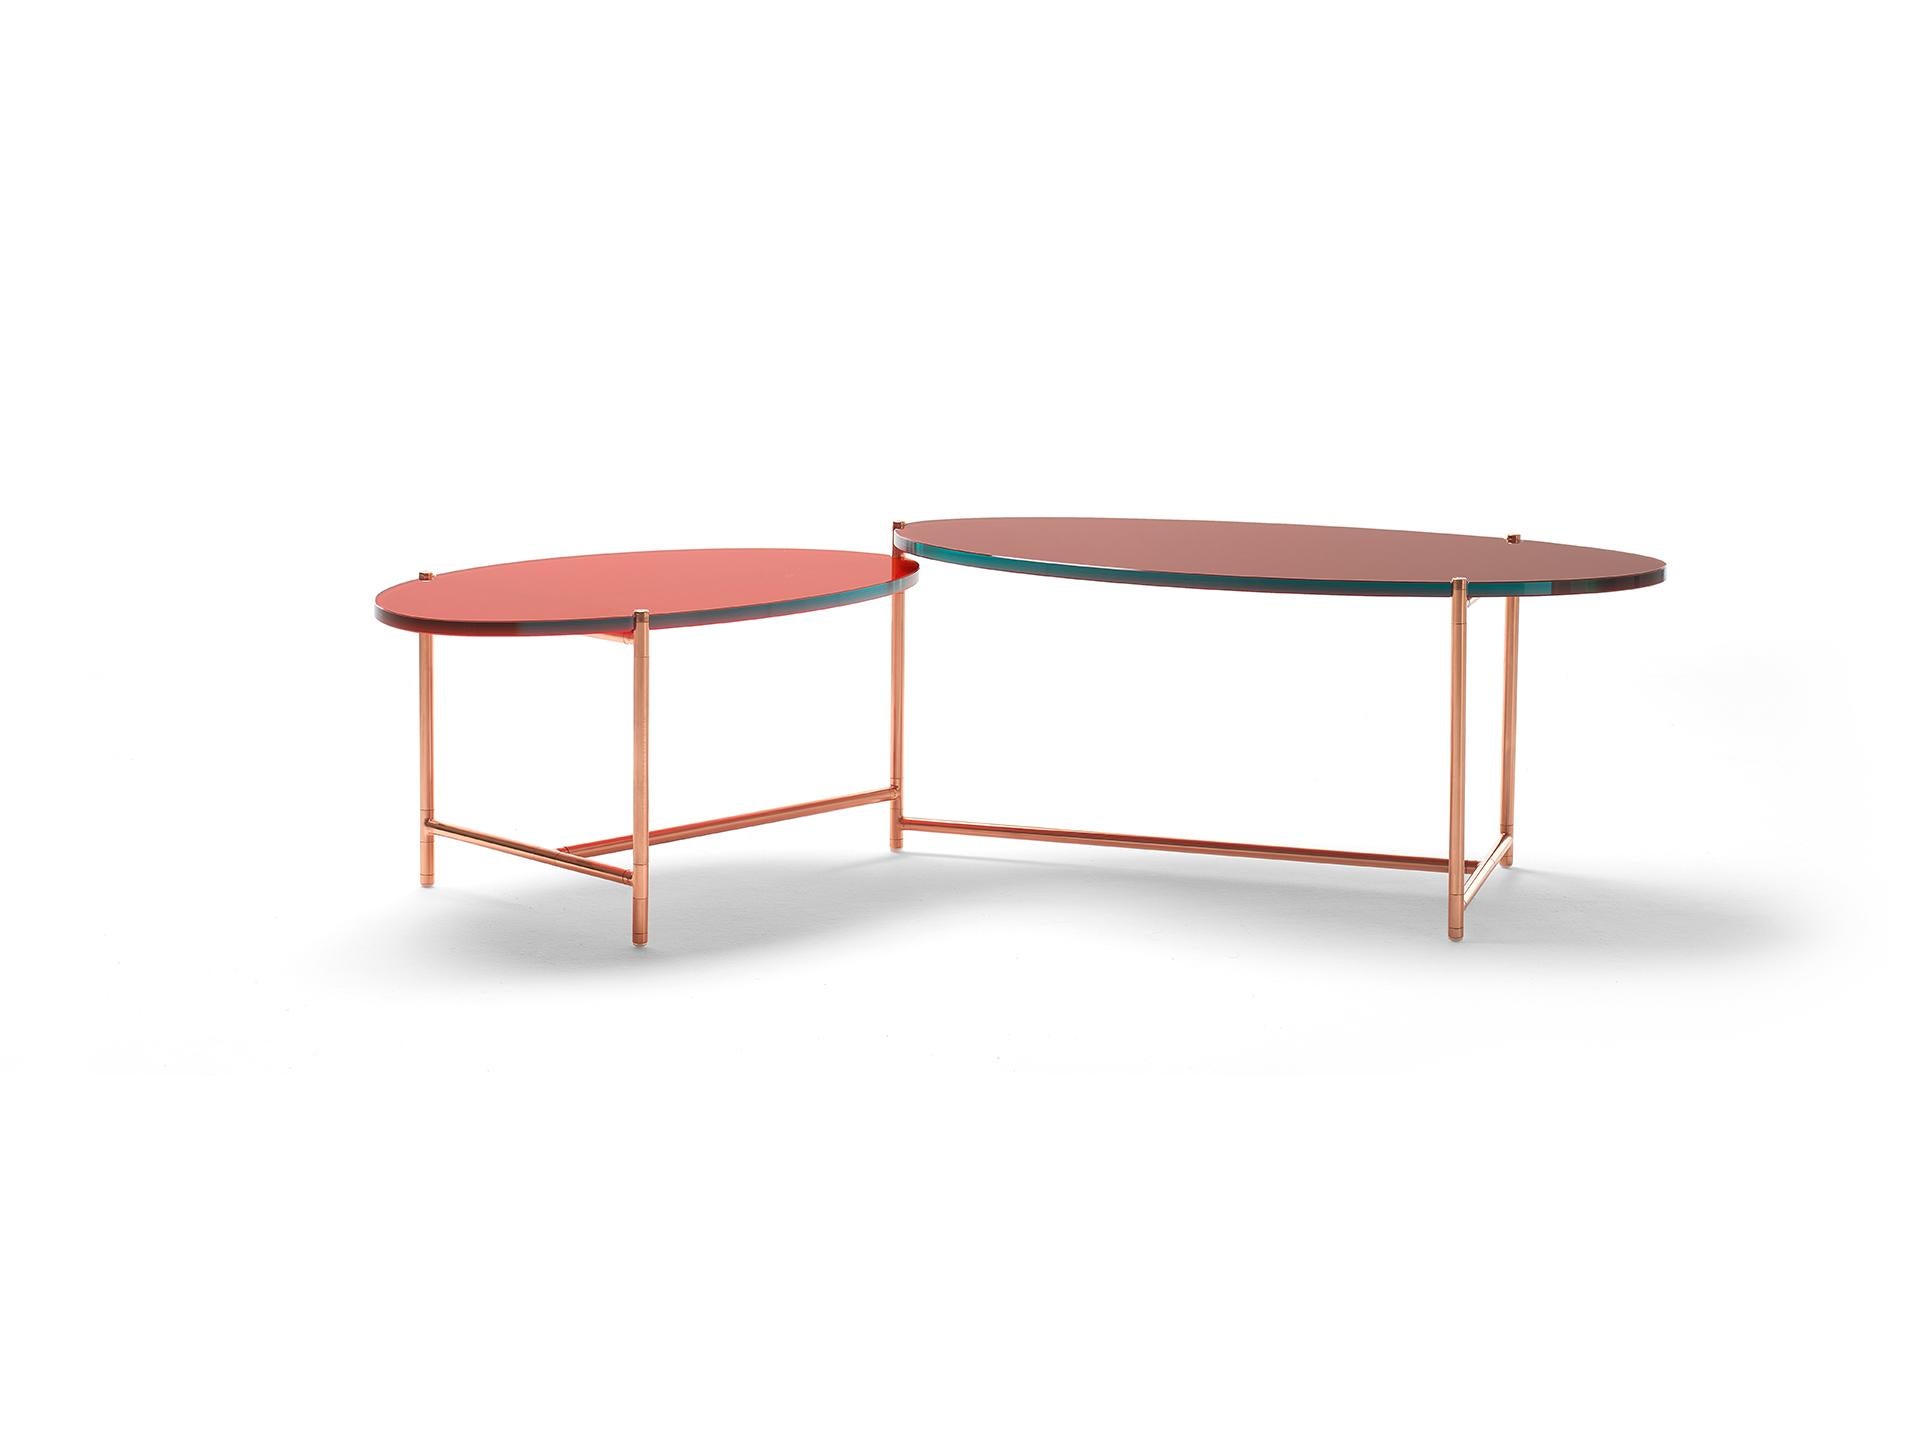 An elegant low table with two tops that can rotate around a central pivoting point, like the hands of a clock. This allows the table to modify its usable surface and to adapt to different uses and spaces. The opposite curves of the two asymmetrical